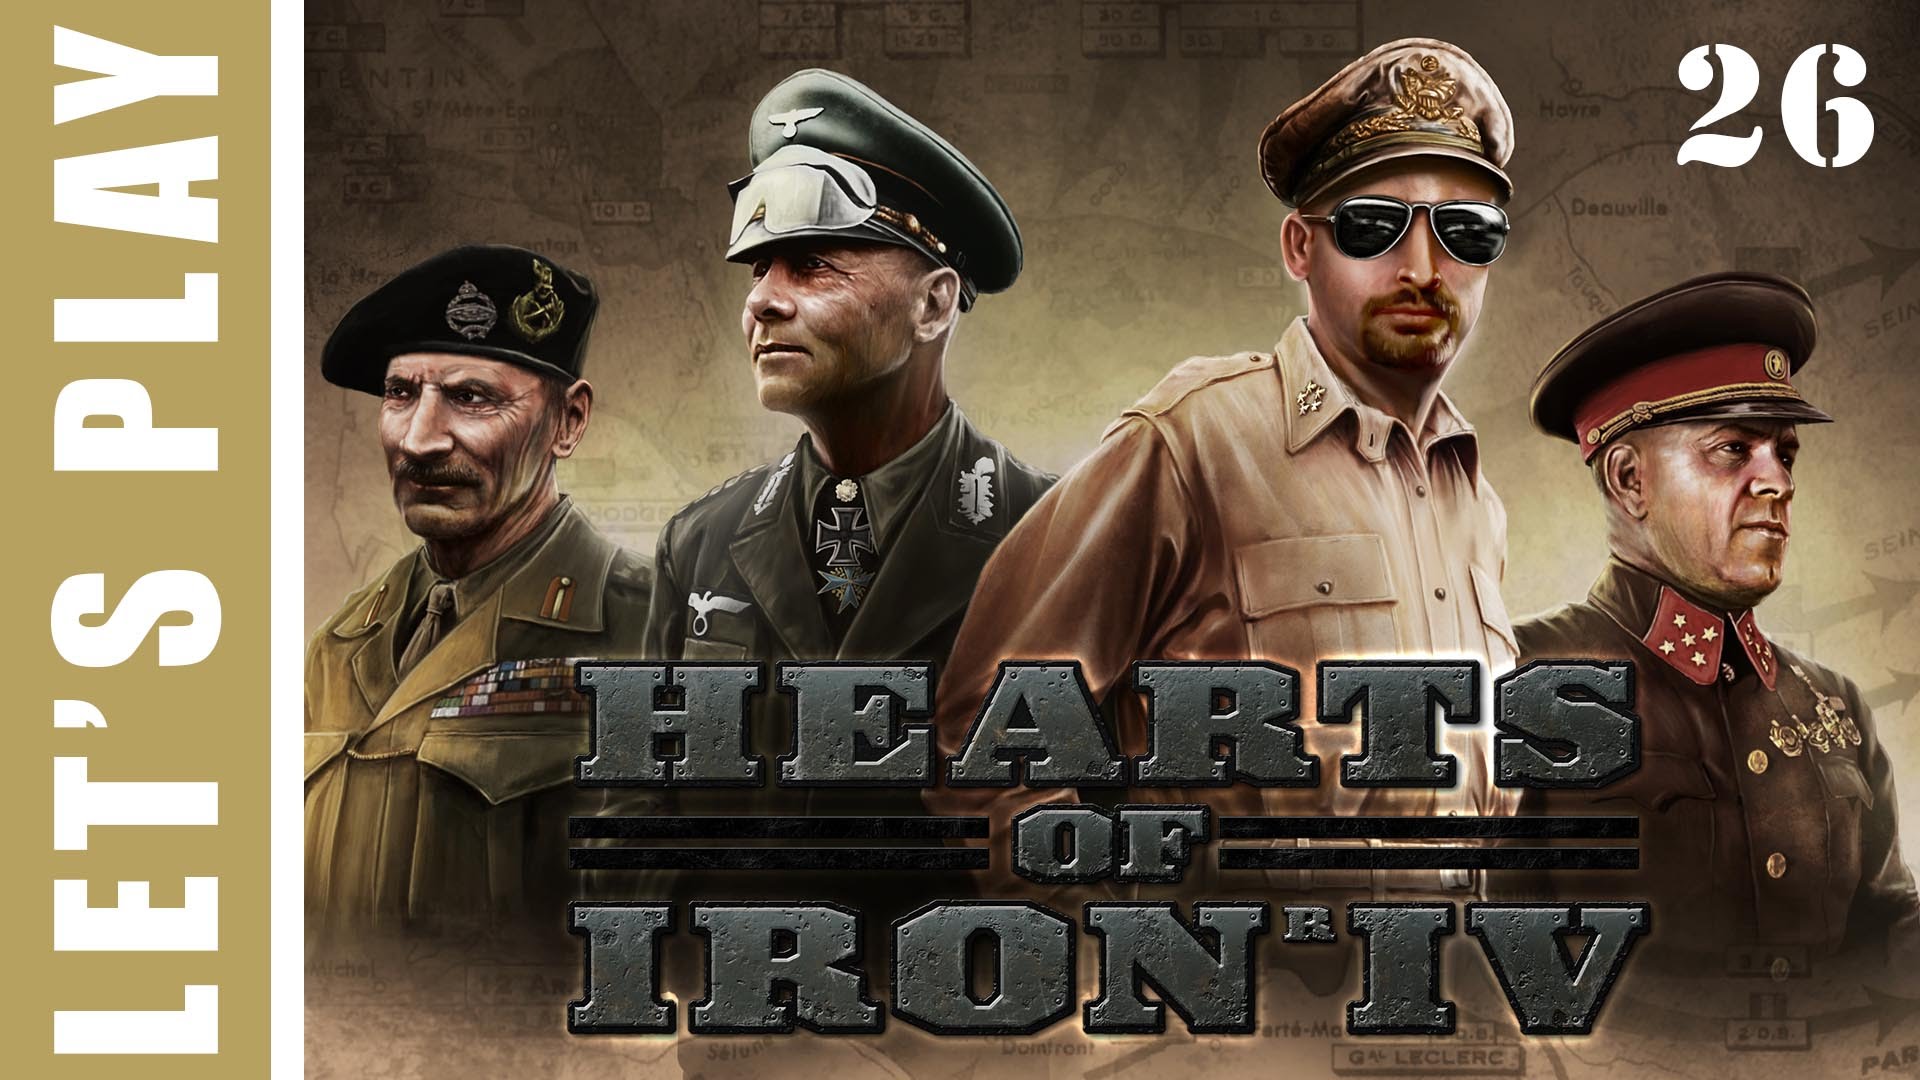 Hearts of Iron IV Germany Wins World War 2 Let’s Play 26